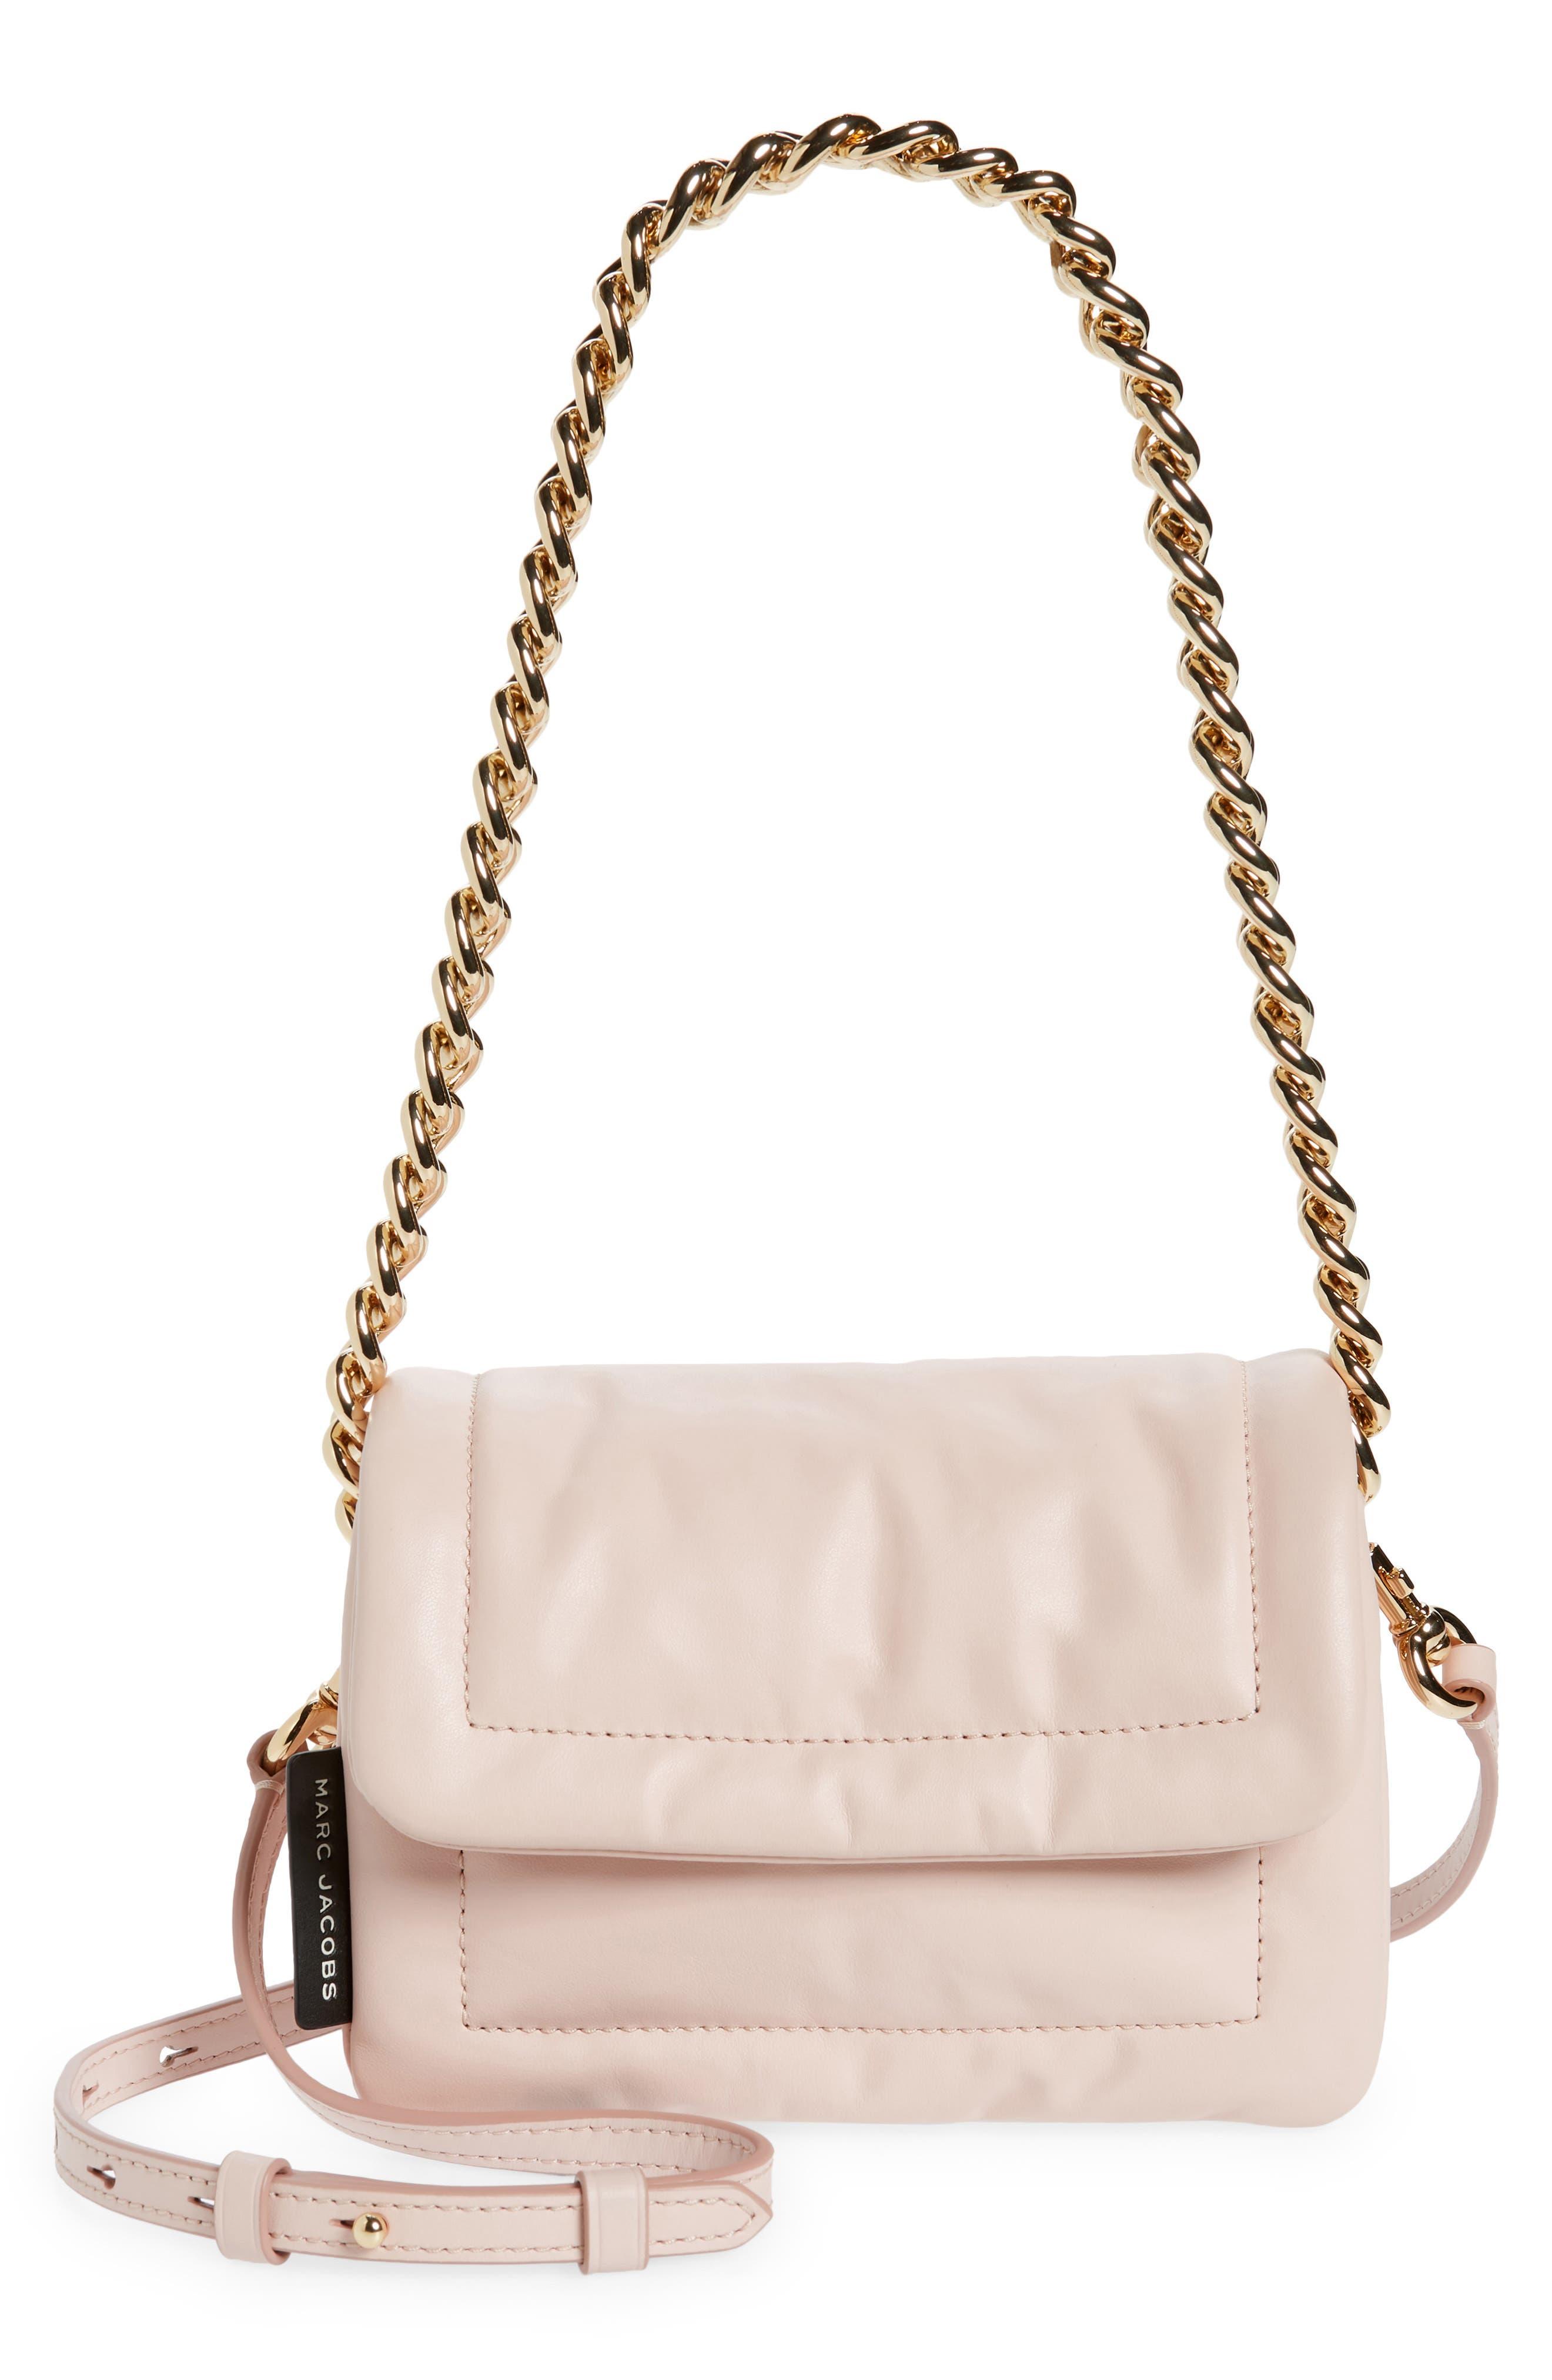 NEW. Pink Marc Jacobs Mini Pillow Bag / Crinkle Leather Shoulder